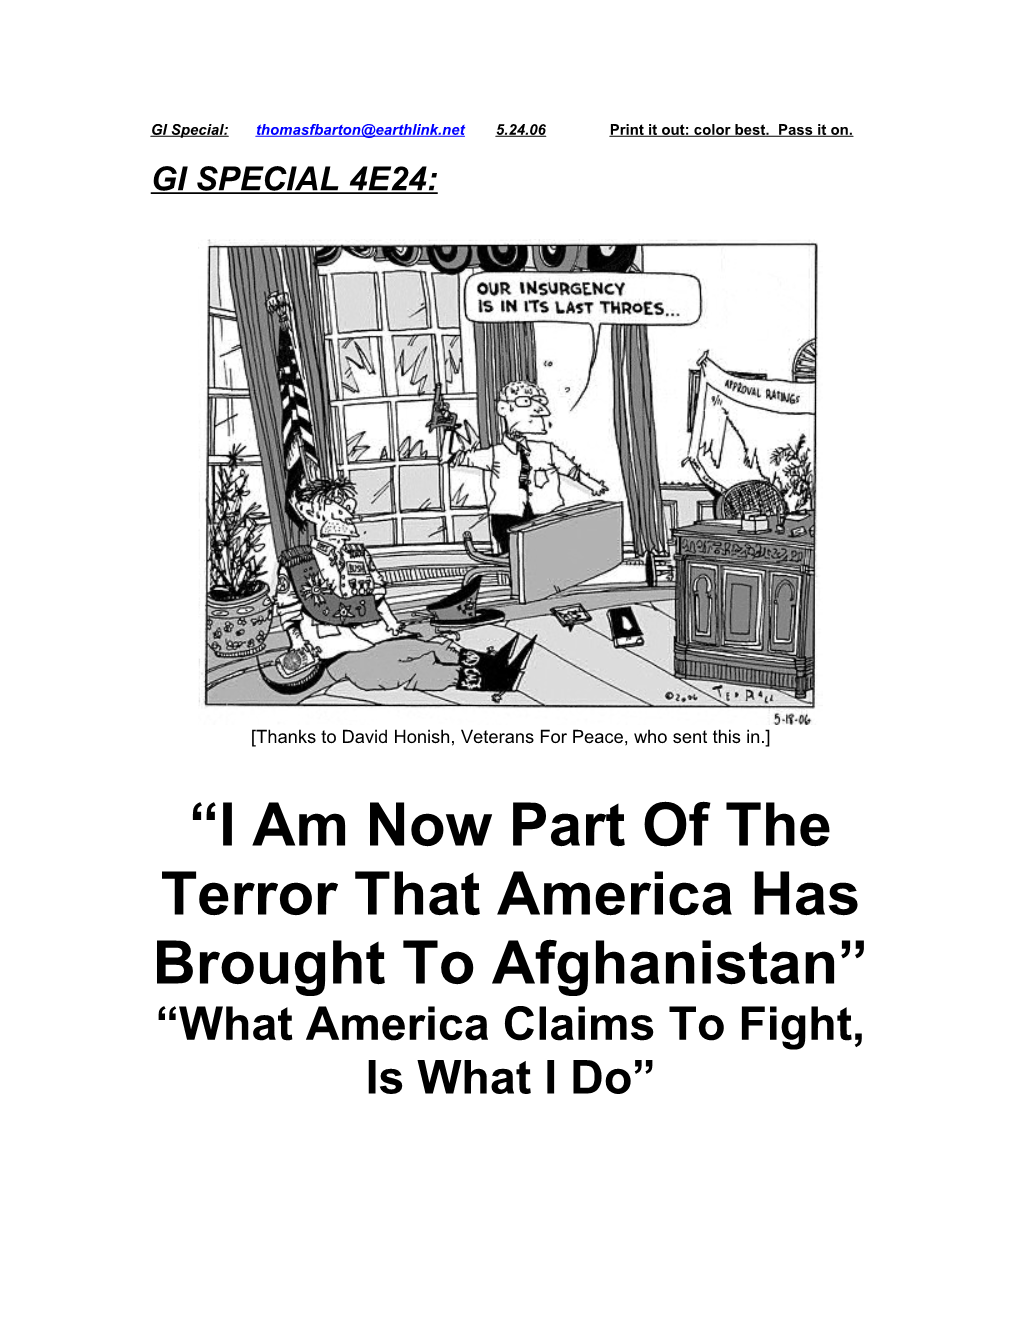 I Am Now Part of the Terror That America Has Brought to Afghanistan